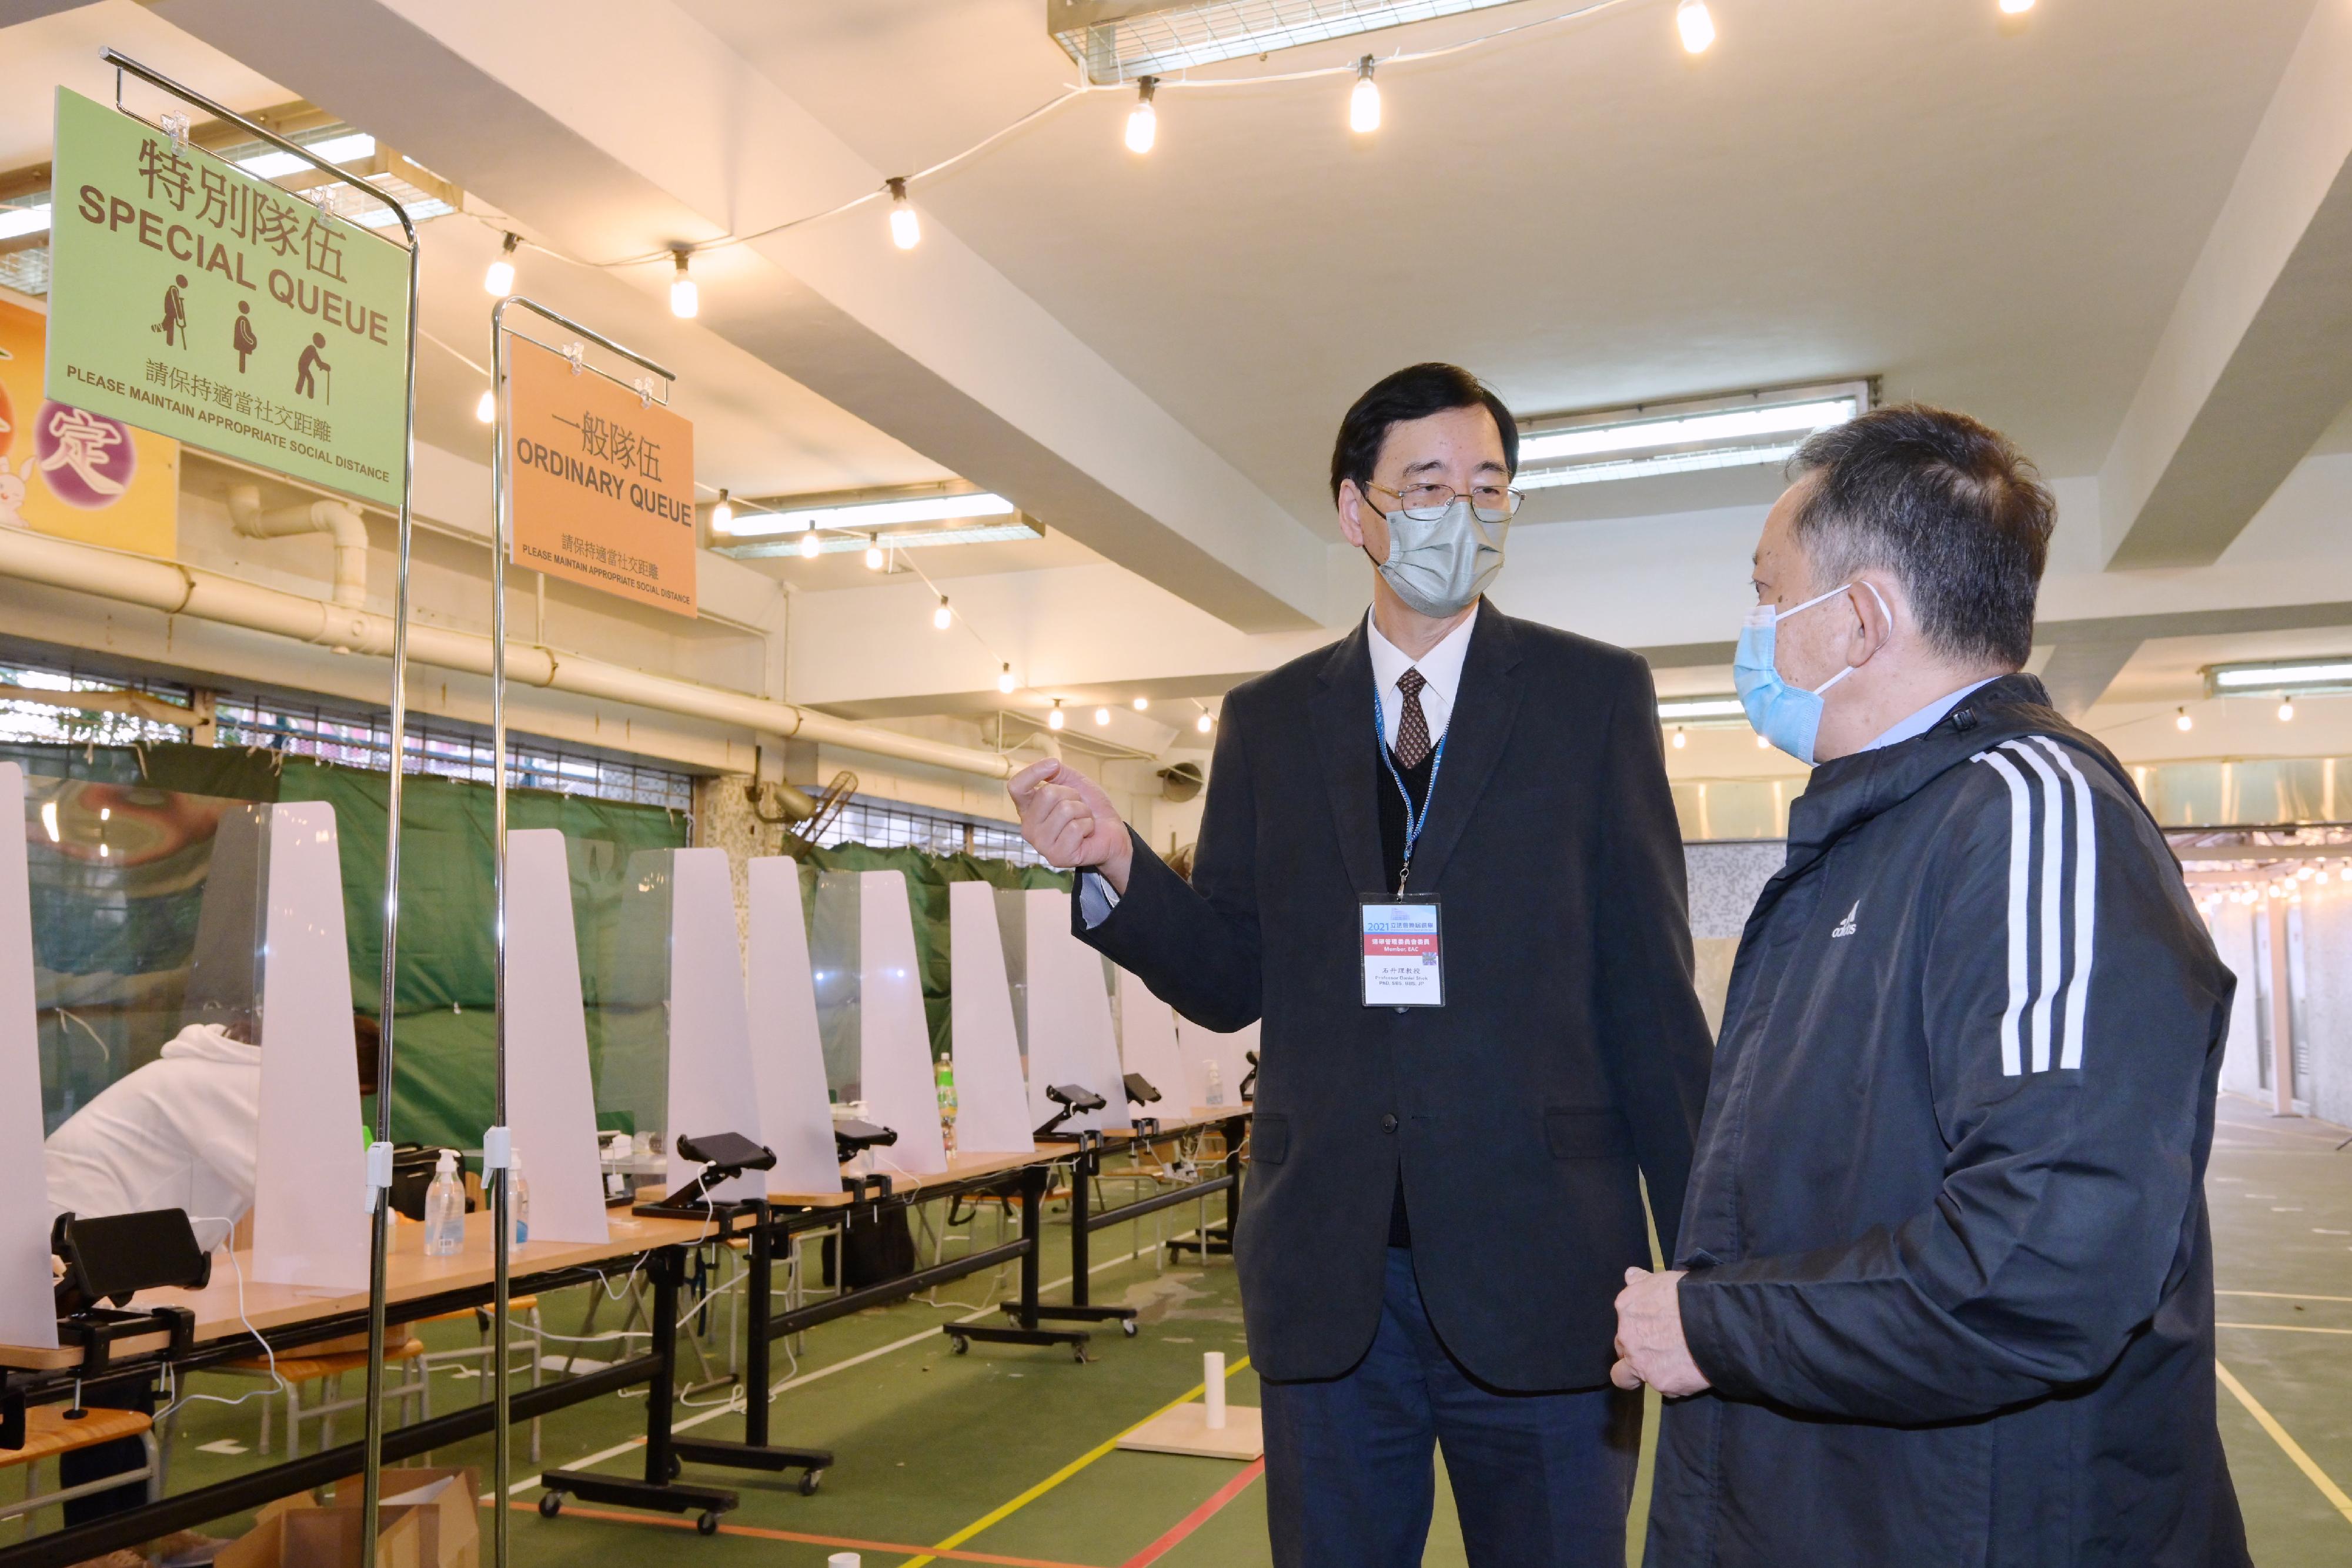 Electoral Affairs Commission member Professor Daniel Shek (left), visits the polling station of the 2021 Legislative Council General Election at Fung Kai Liu Yun Sum Memorial School today (December 18) to inspect the electoral preparation work.